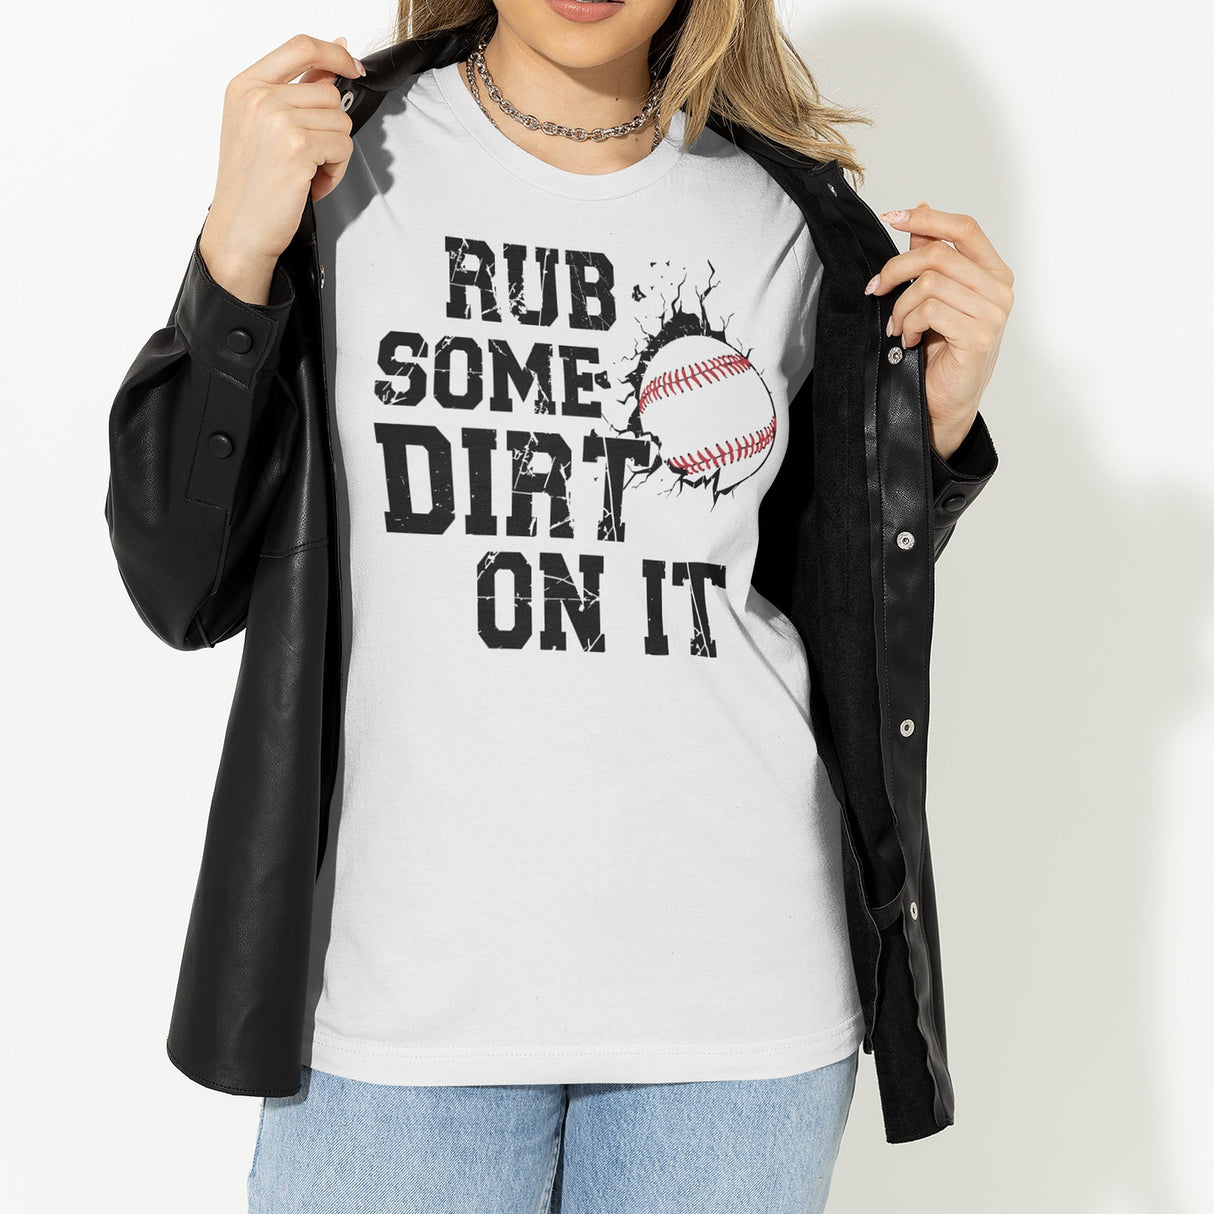 rub-some-dirt-on-it-sports-tee-sarcastic-t-shirt-baseball-tee-gift-t-shirt-workout-tee#color_white